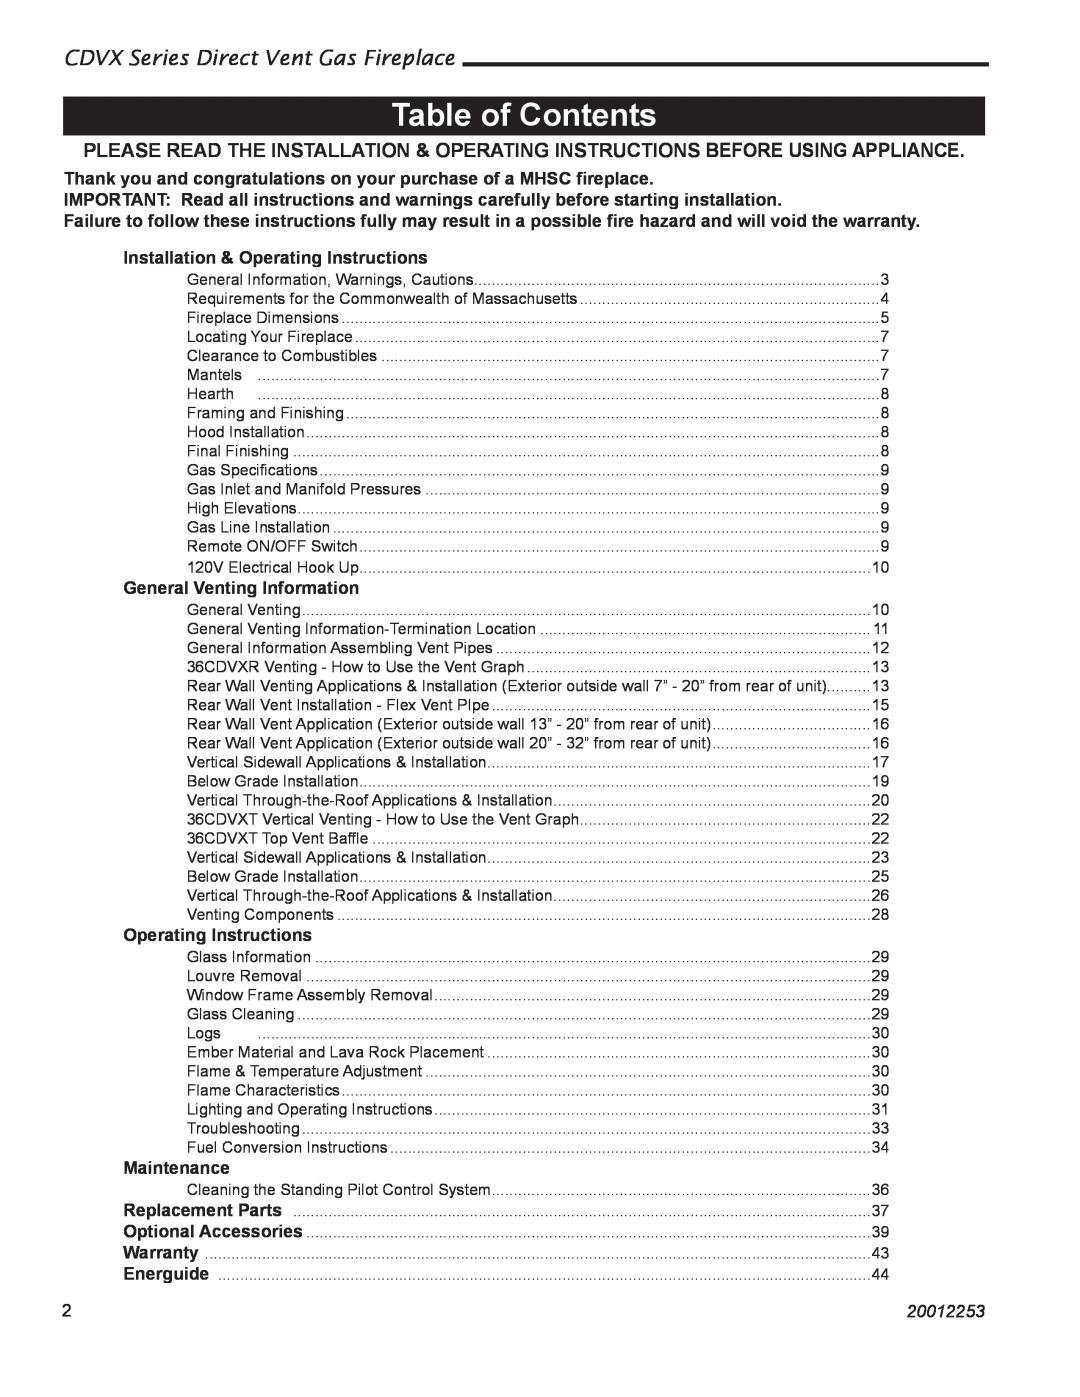 Monessen Hearth 36CDVXTRN installation instructions Table of Contents, CDVX Series Direct Vent Gas Fireplace, 20012253 